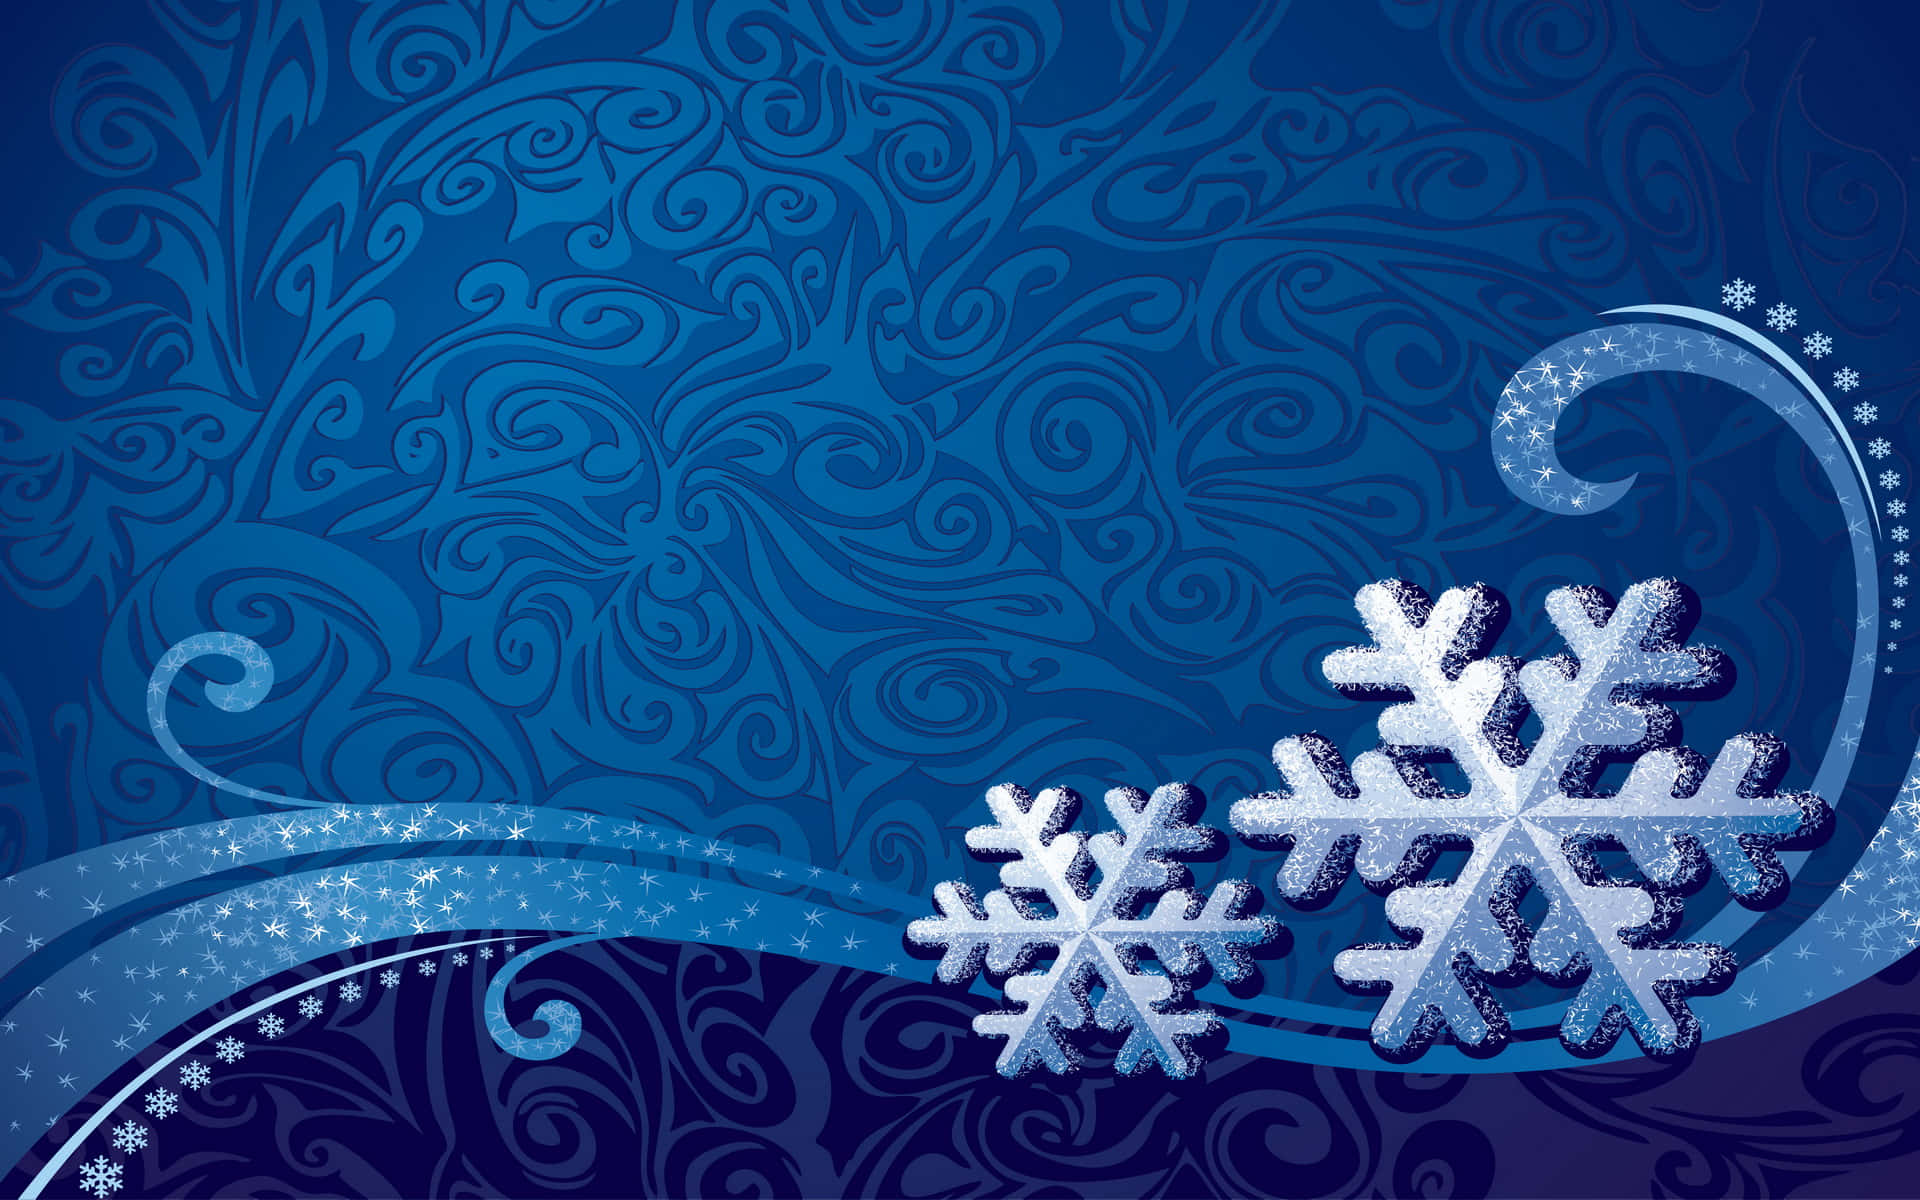 “Beautiful Snowflake - a Symbol of Winter and Pristine Beauty”